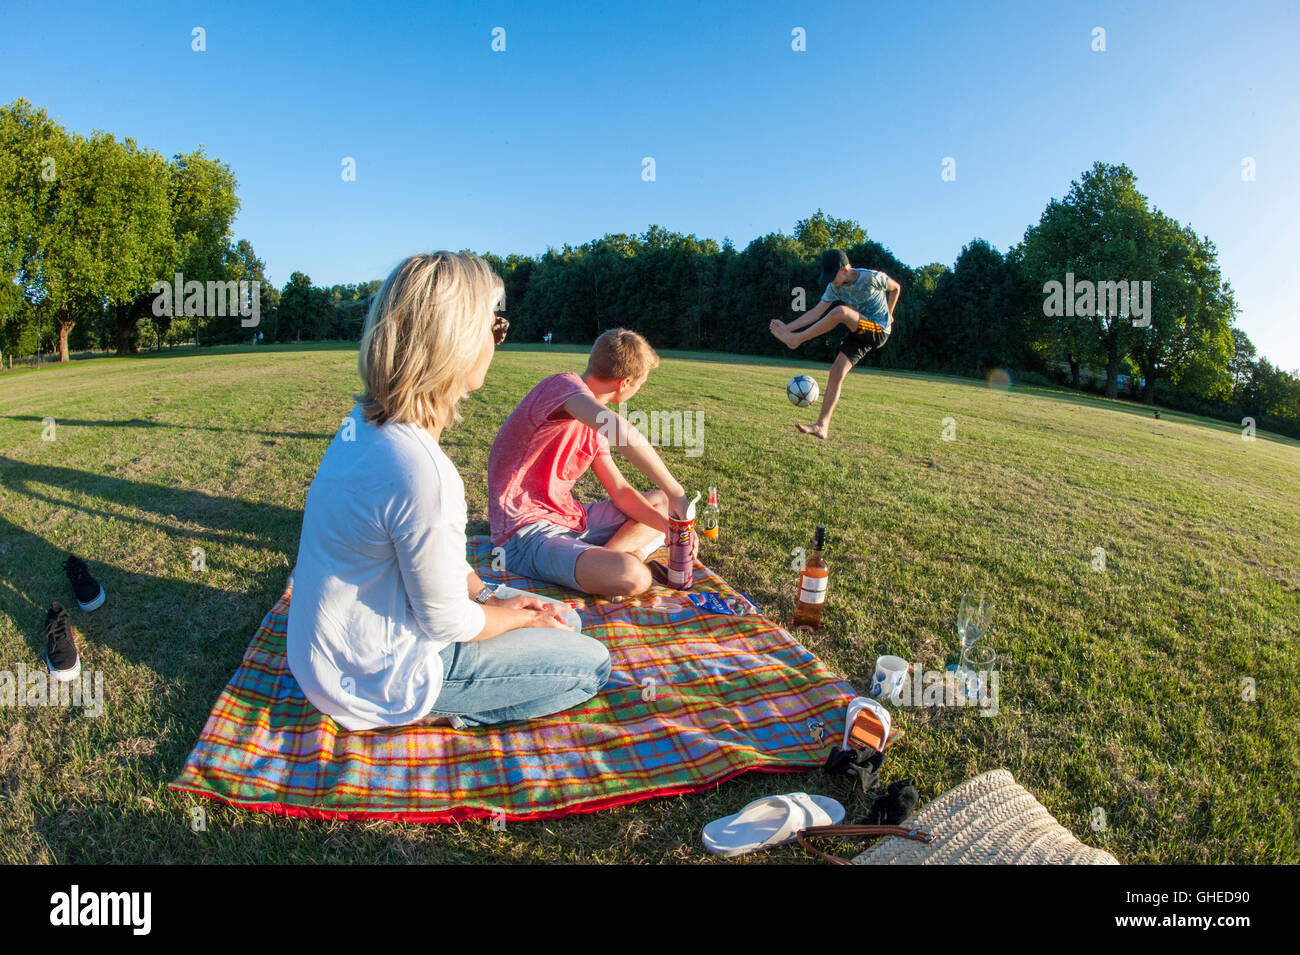 A family picnic in a London park Stock Photo